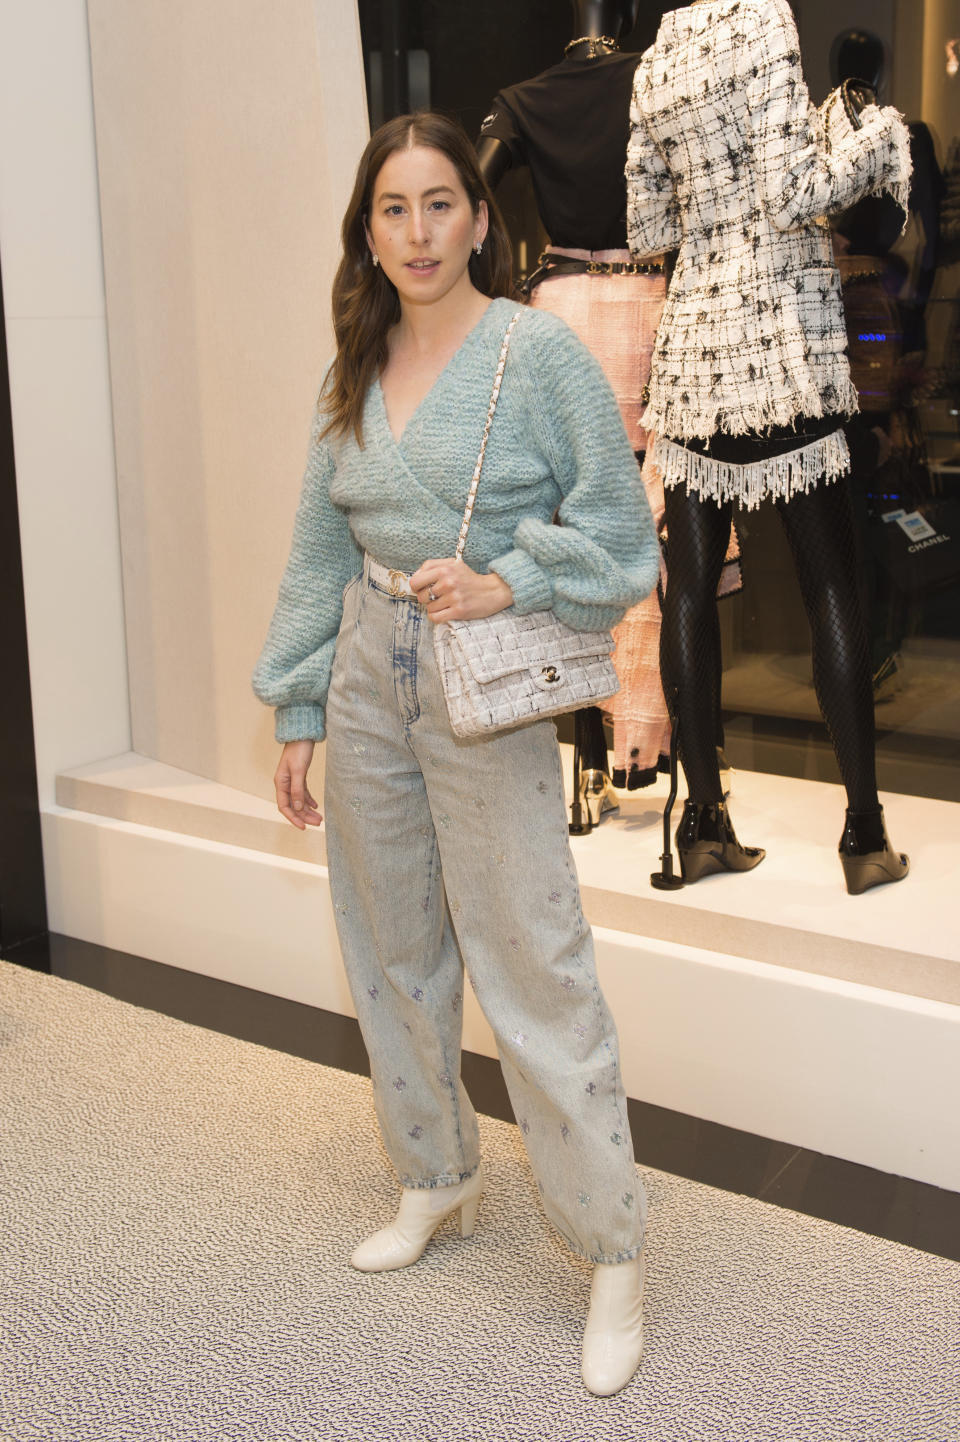 FILE - Alana Haim attends the CHANEL Miami Design District boutique opening celebration on Dec. 2, 2021, in Miami. Haim turns 31 on Dec. 15. (Photo by Scott Roth/Invision/AP, File)